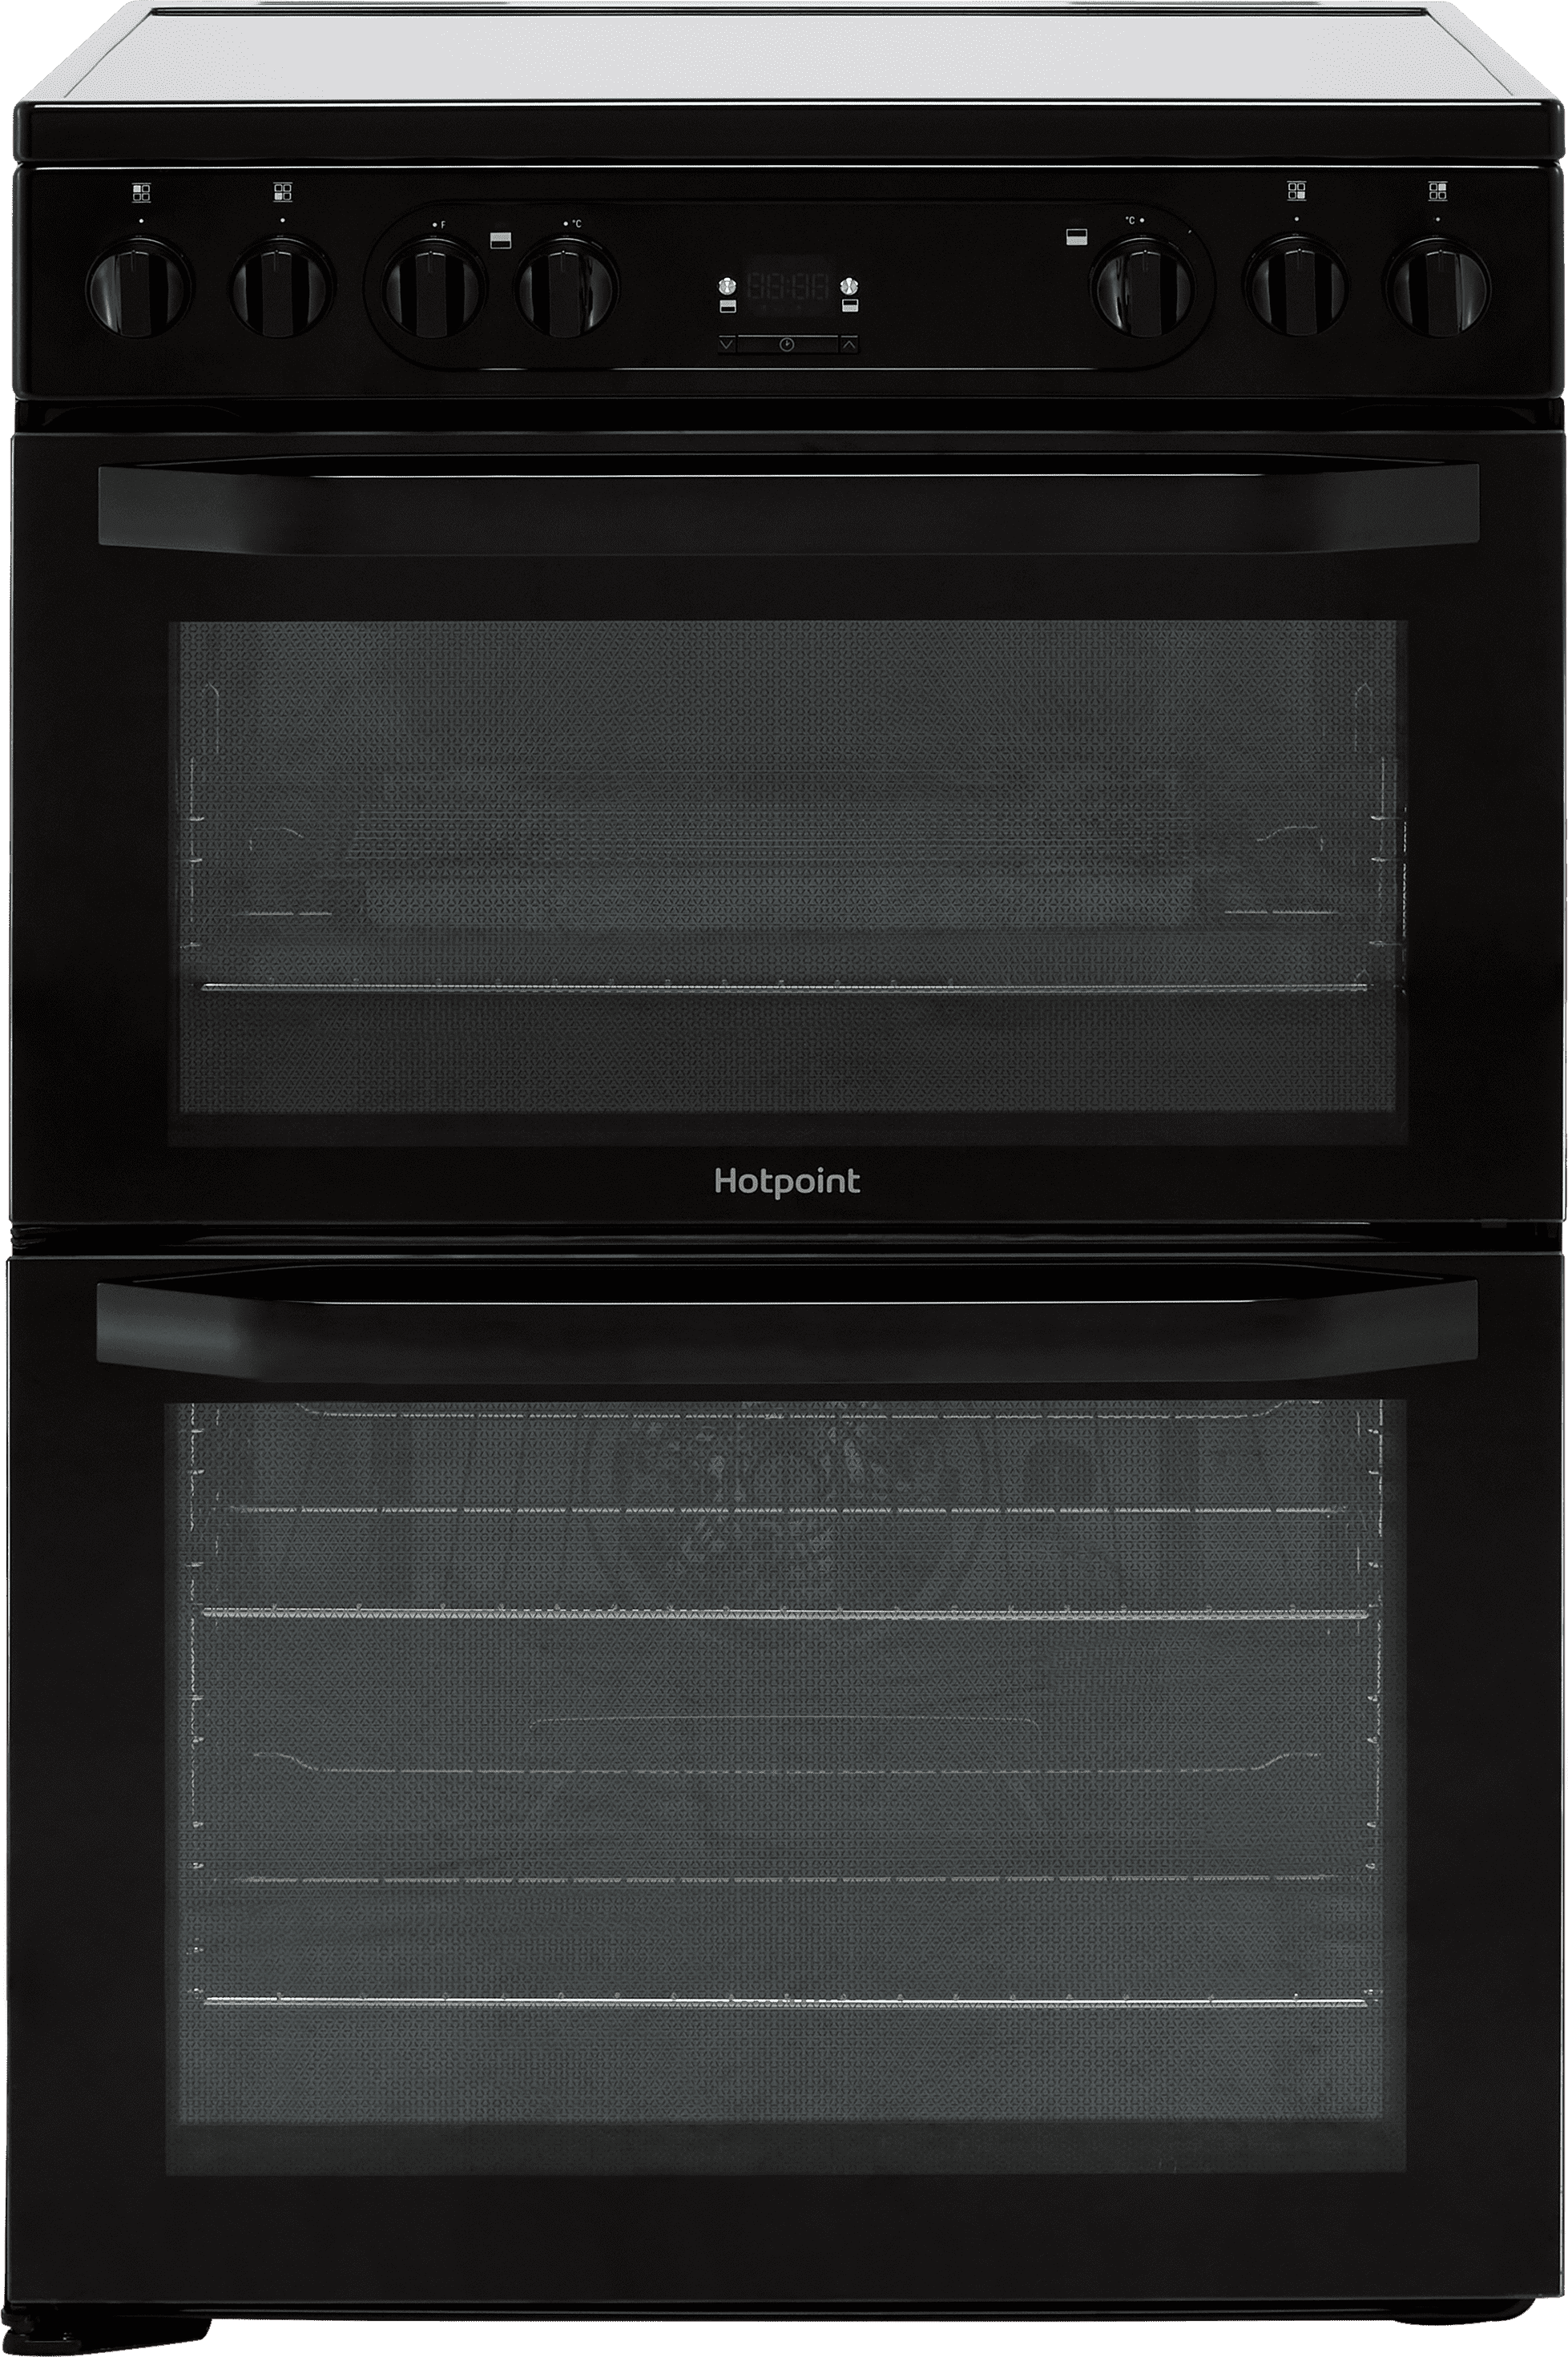 Hotpoint HDM67V92HCB/UK 60cm Electric Cooker with Ceramic Hob - Black - A/A Rated, Black